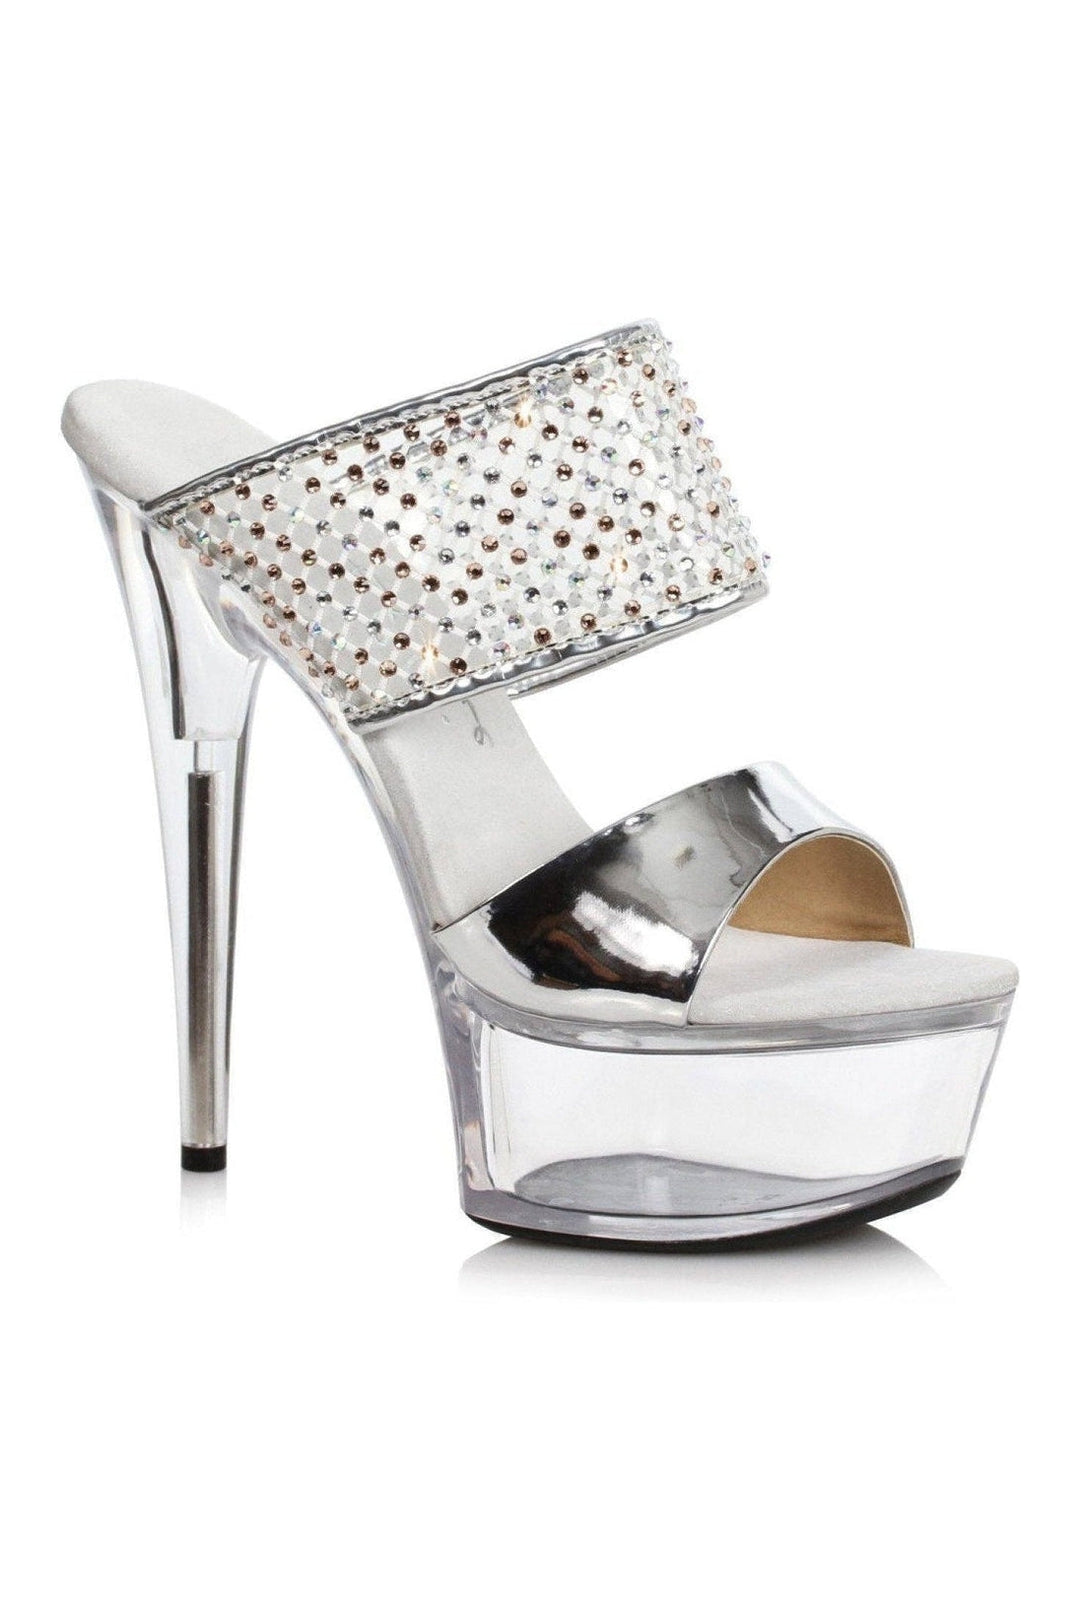 609-AILEEN Stripper Slide | Silver Faux Leather-Ellie Shoes-SEXYSHOES.COM